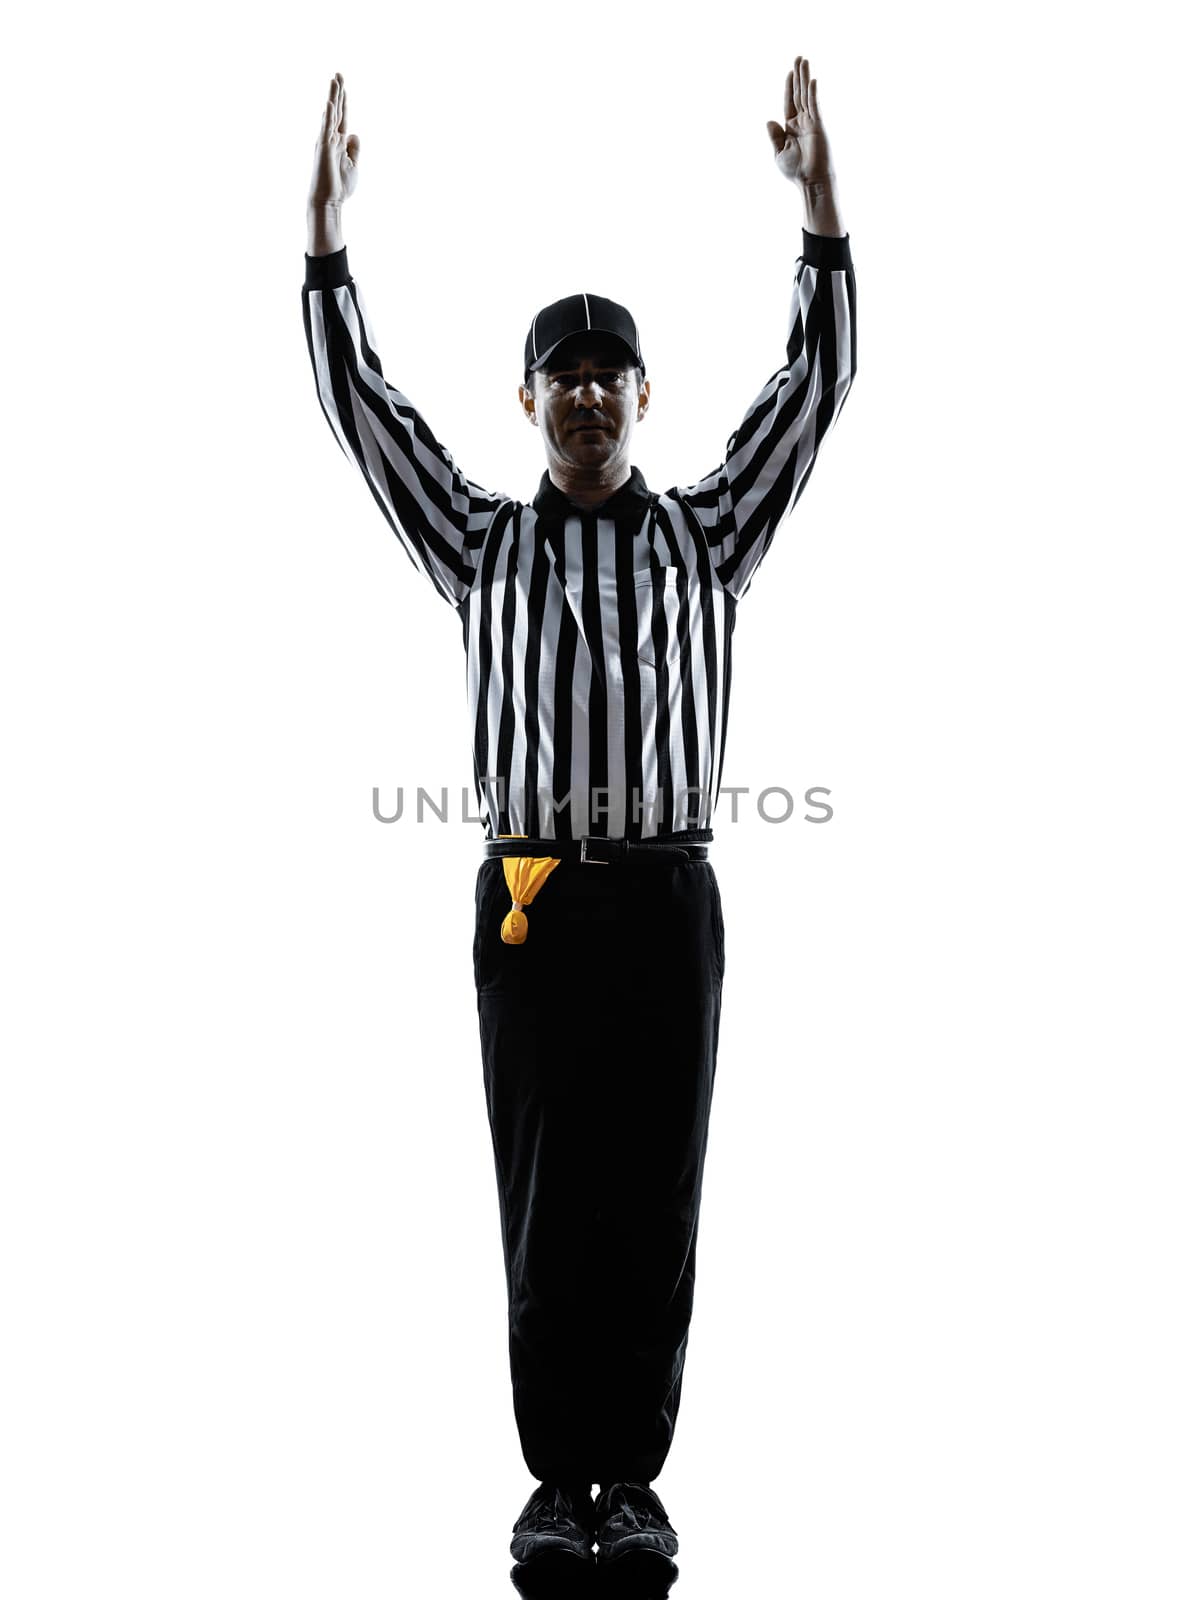 american football referee touchdown gestures silhouettes by PIXSTILL